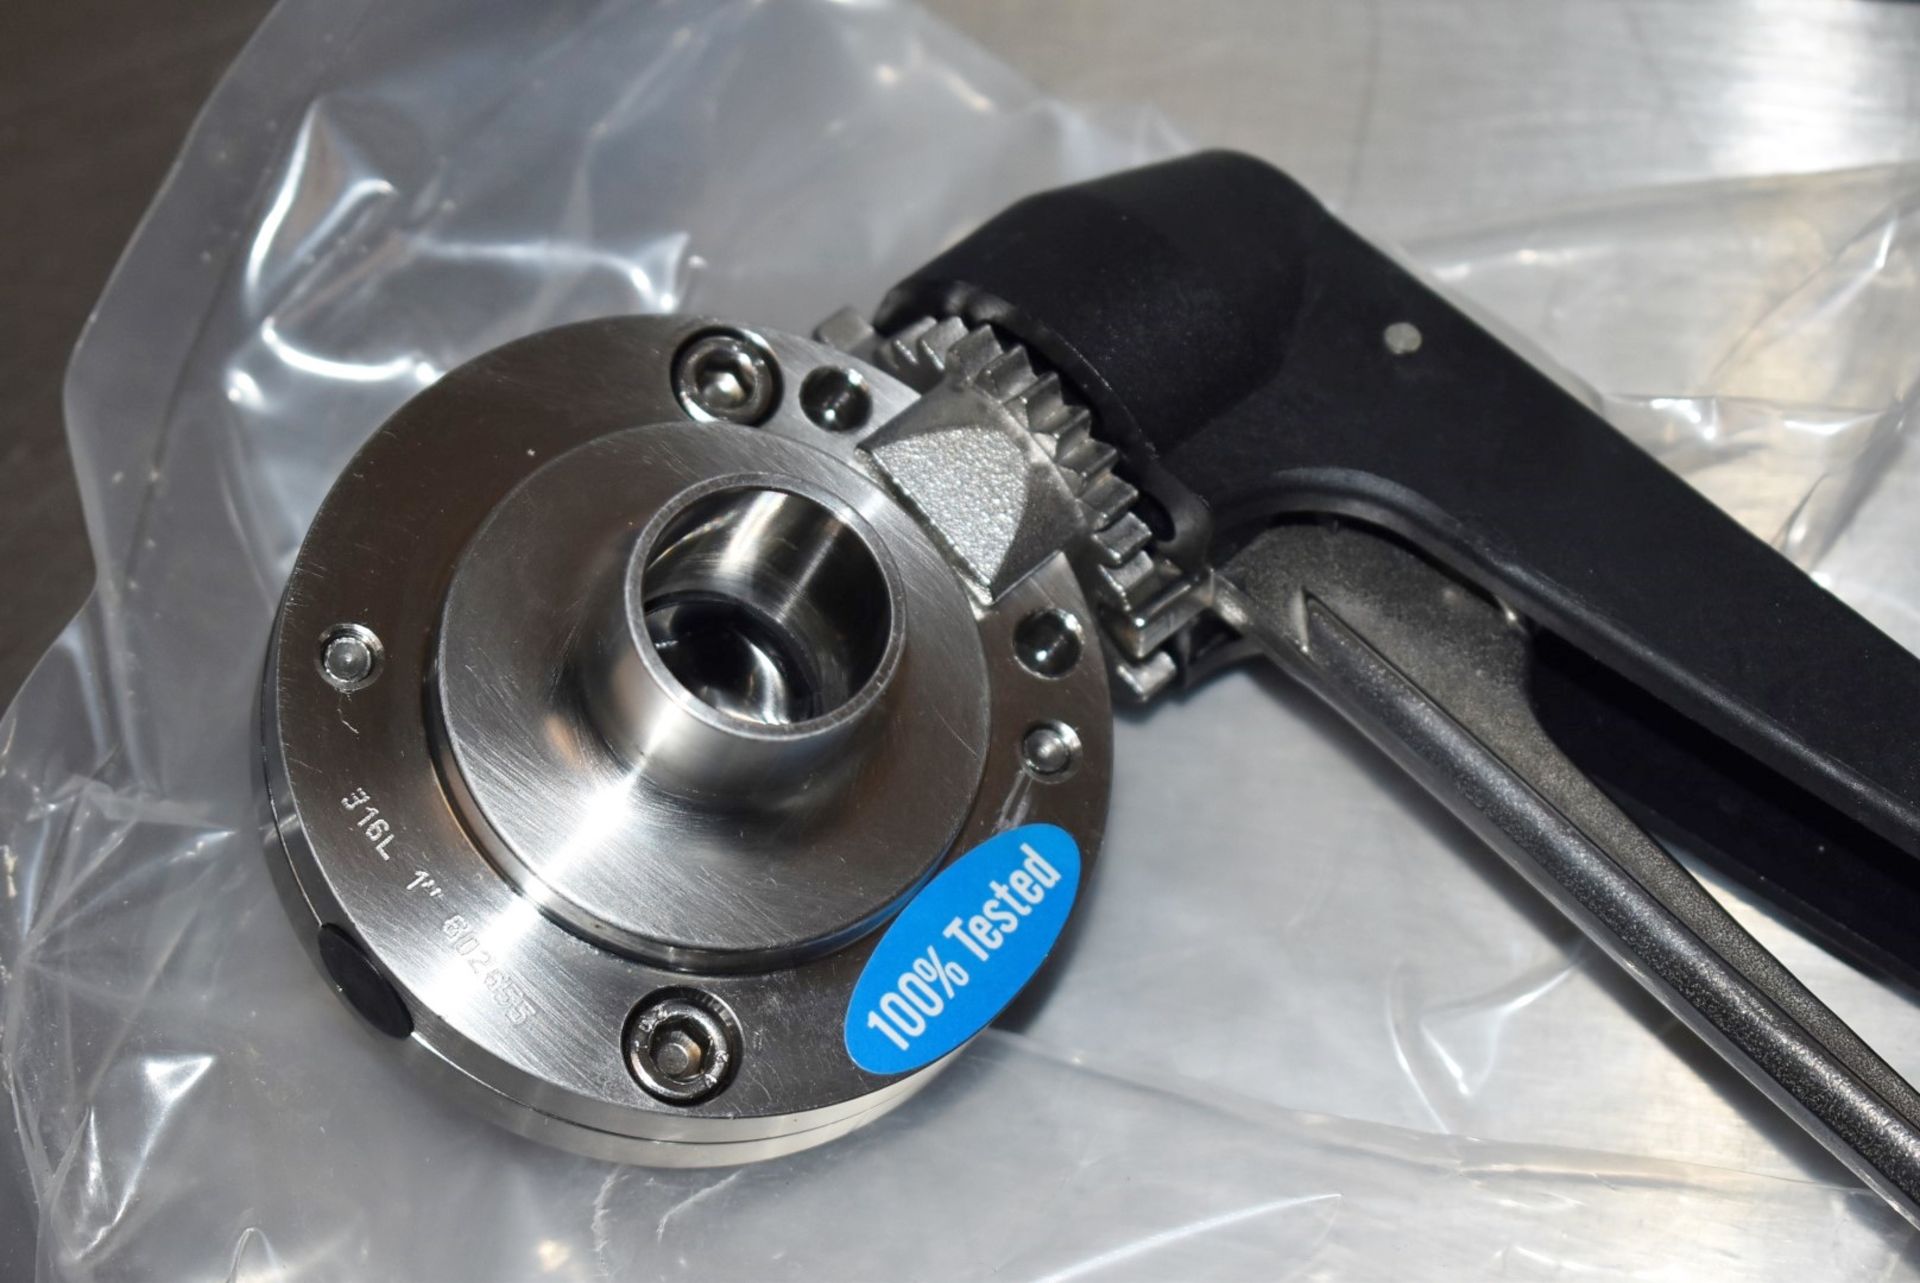 1 x Butterfly Valve - New in Original Box - Model: 3A - Material: 316L - Type: Weld - Size: 1 Inch - - Image 4 of 6